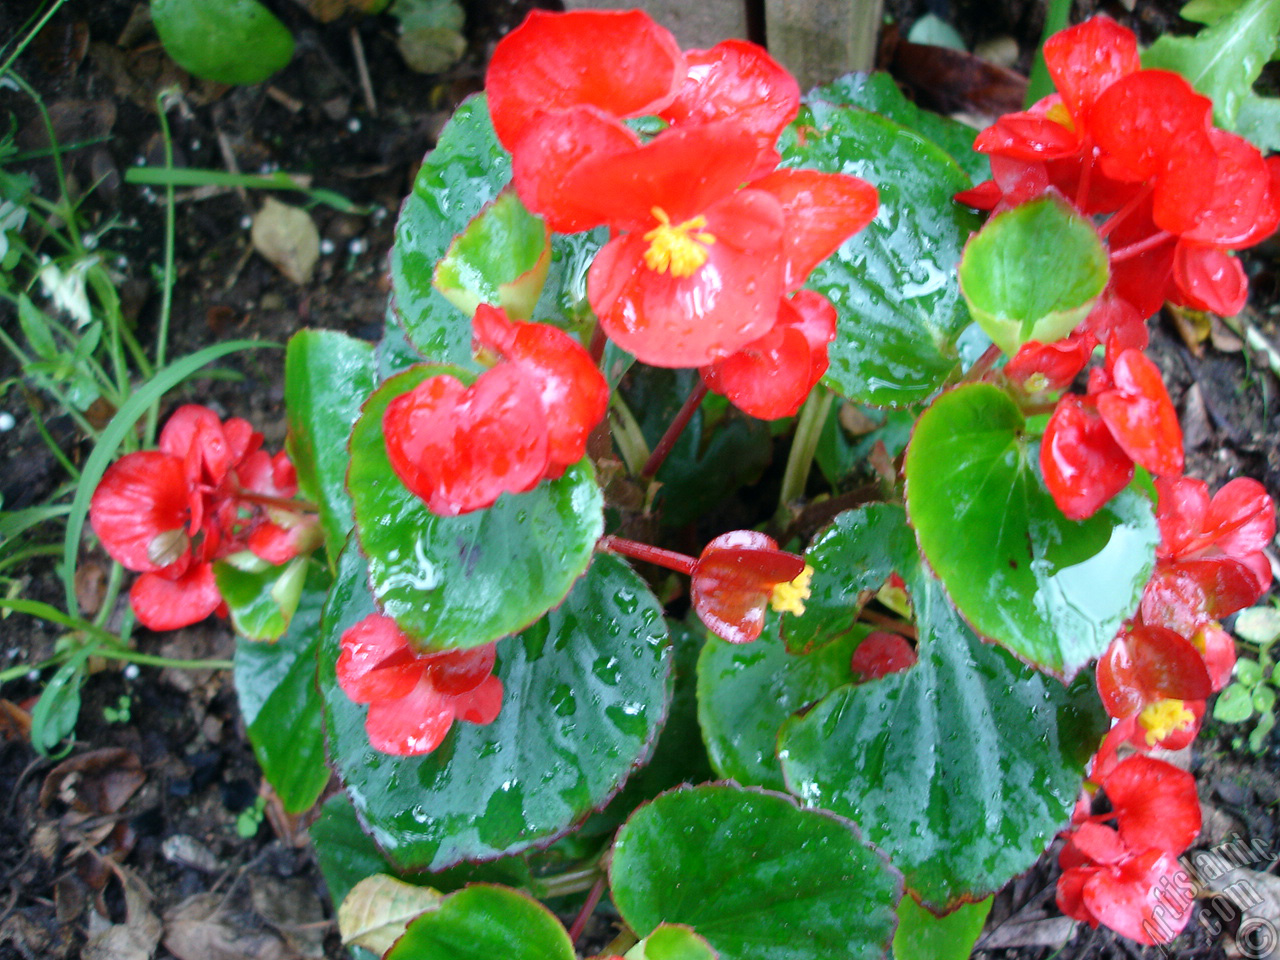 Wax Begonia -Bedding Begonia- with red flowers and green leaves.
